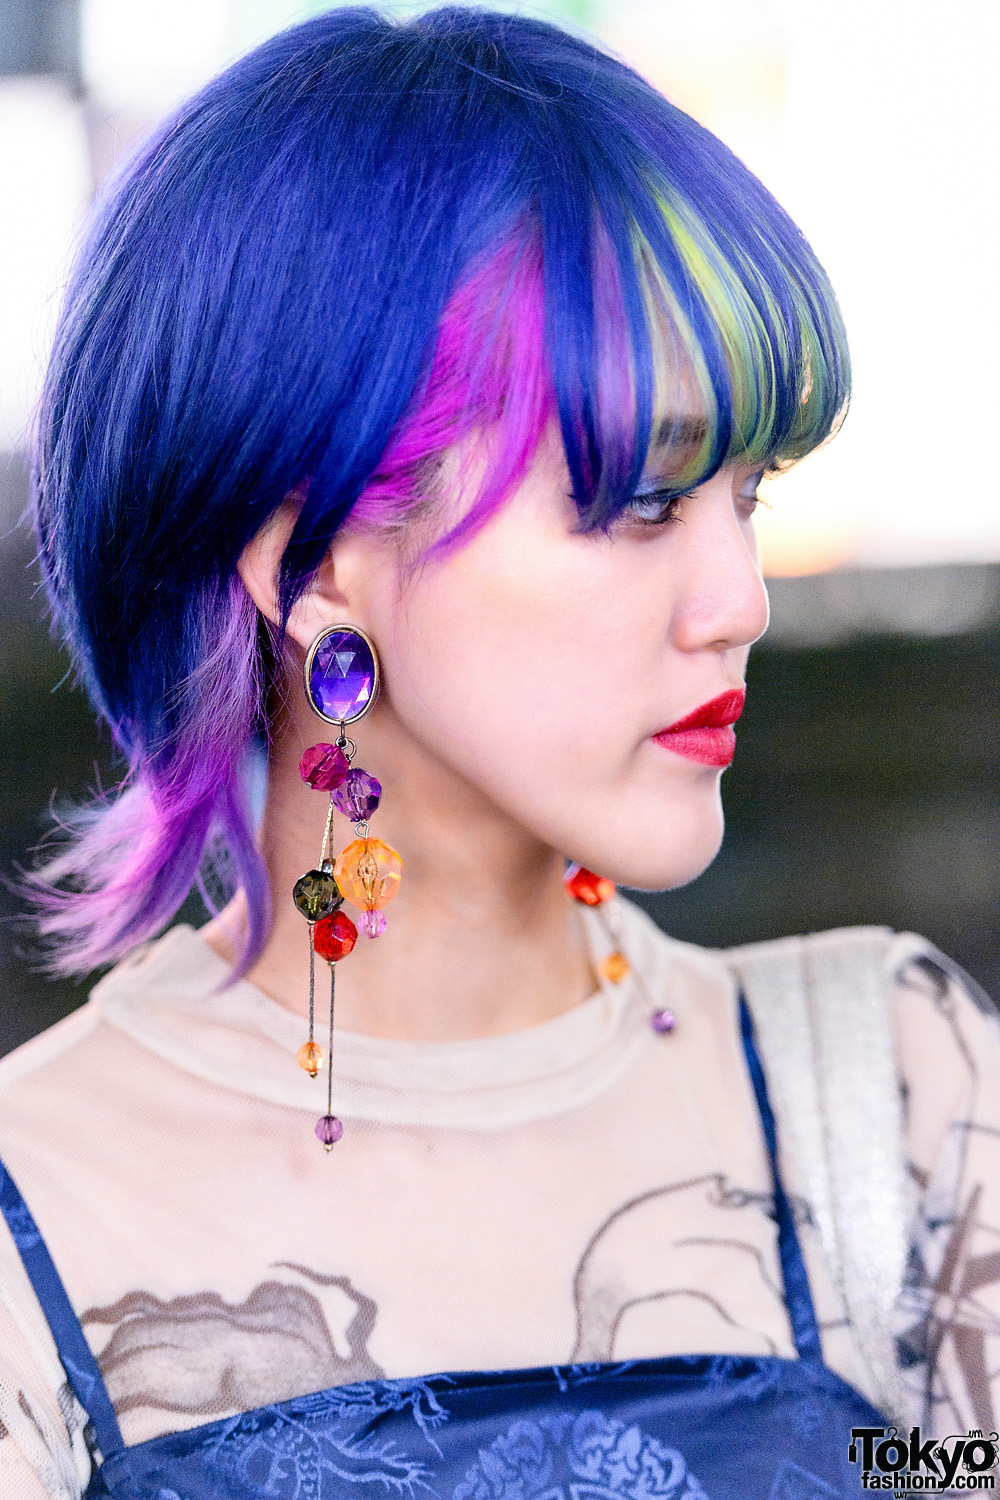 Tokyo Streetwear Style w/ Colorful Hairstyle, Vintage Bead 